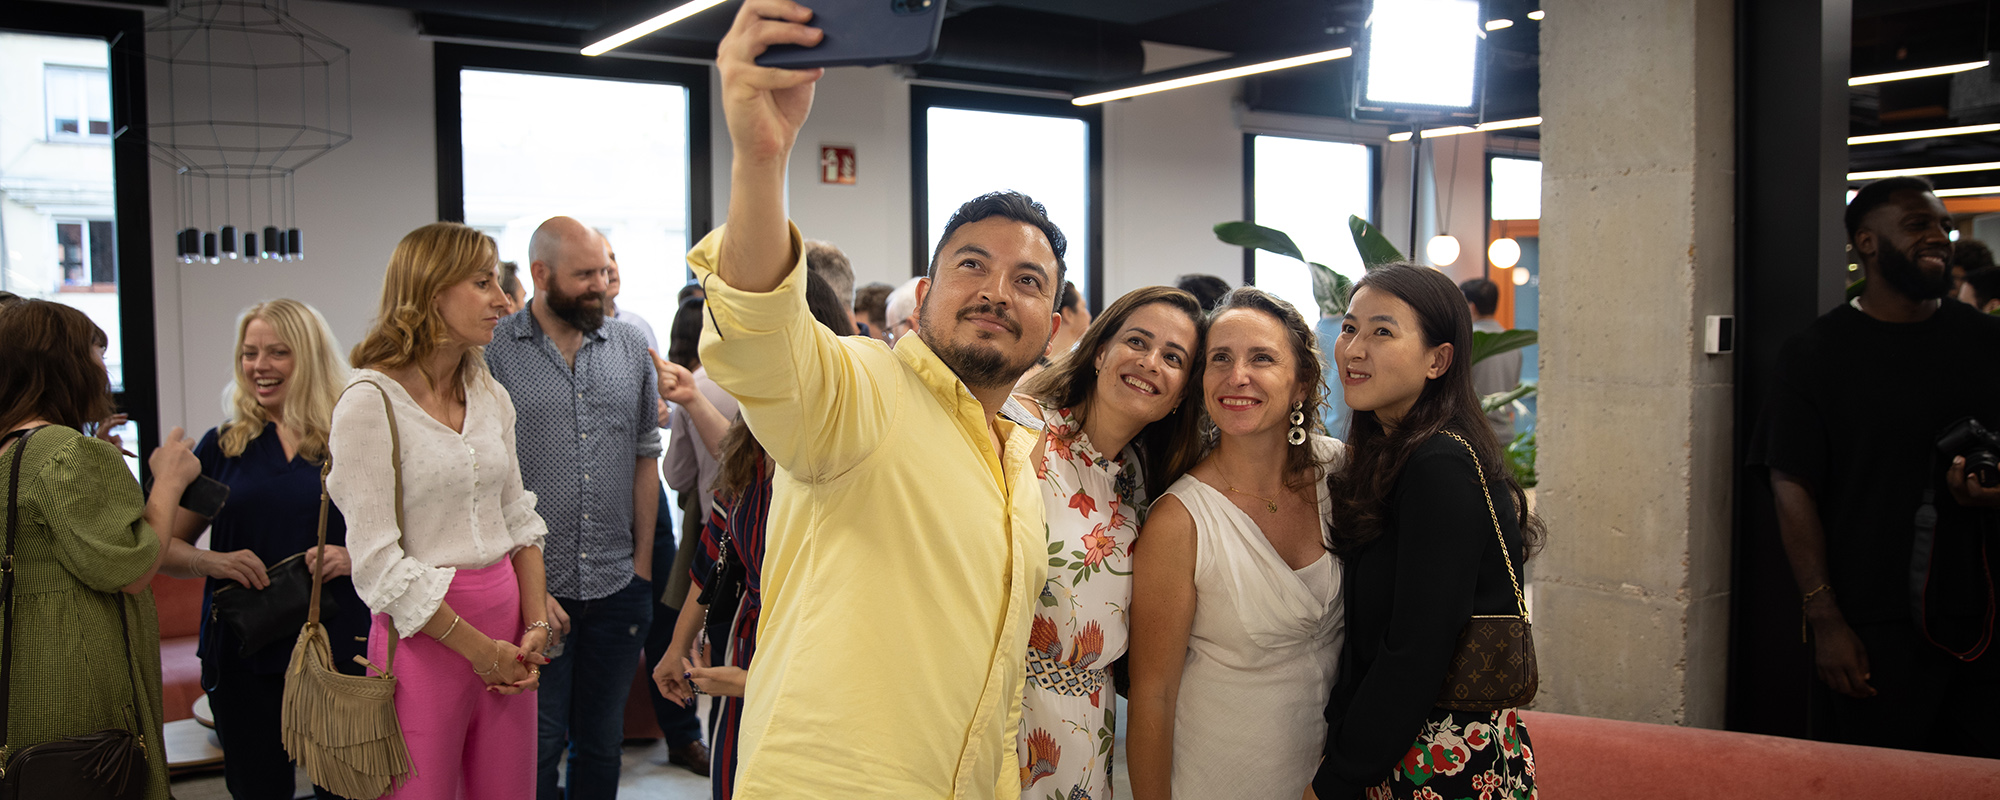 Lightsource bp team members celebrating at the Madrid office opening